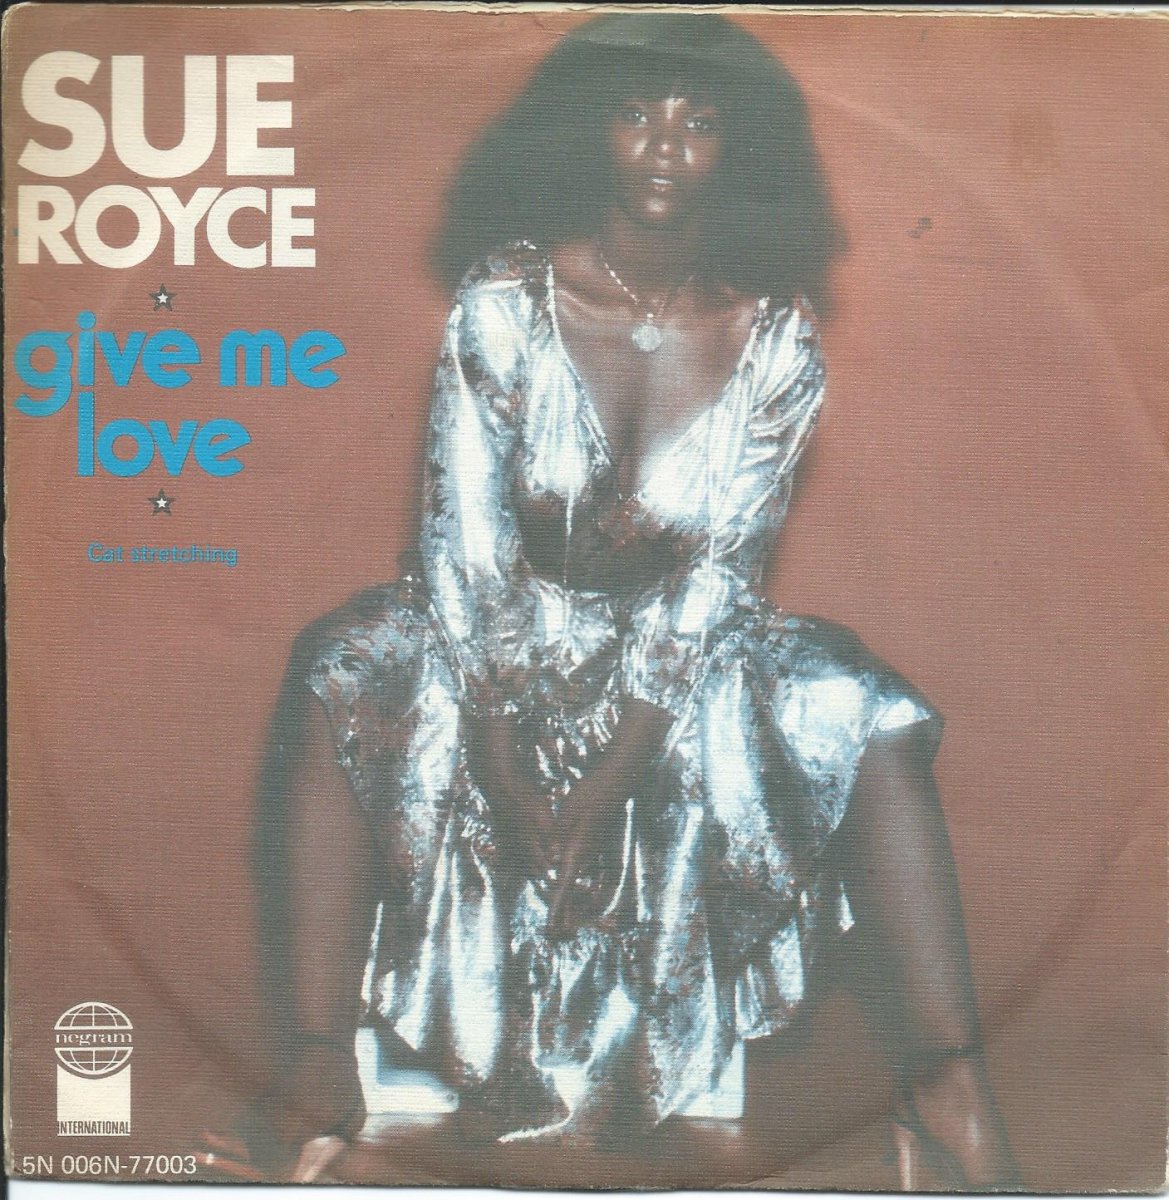 SUE ROYCE / GIVE ME LOVE / CAT STRETCHING (7